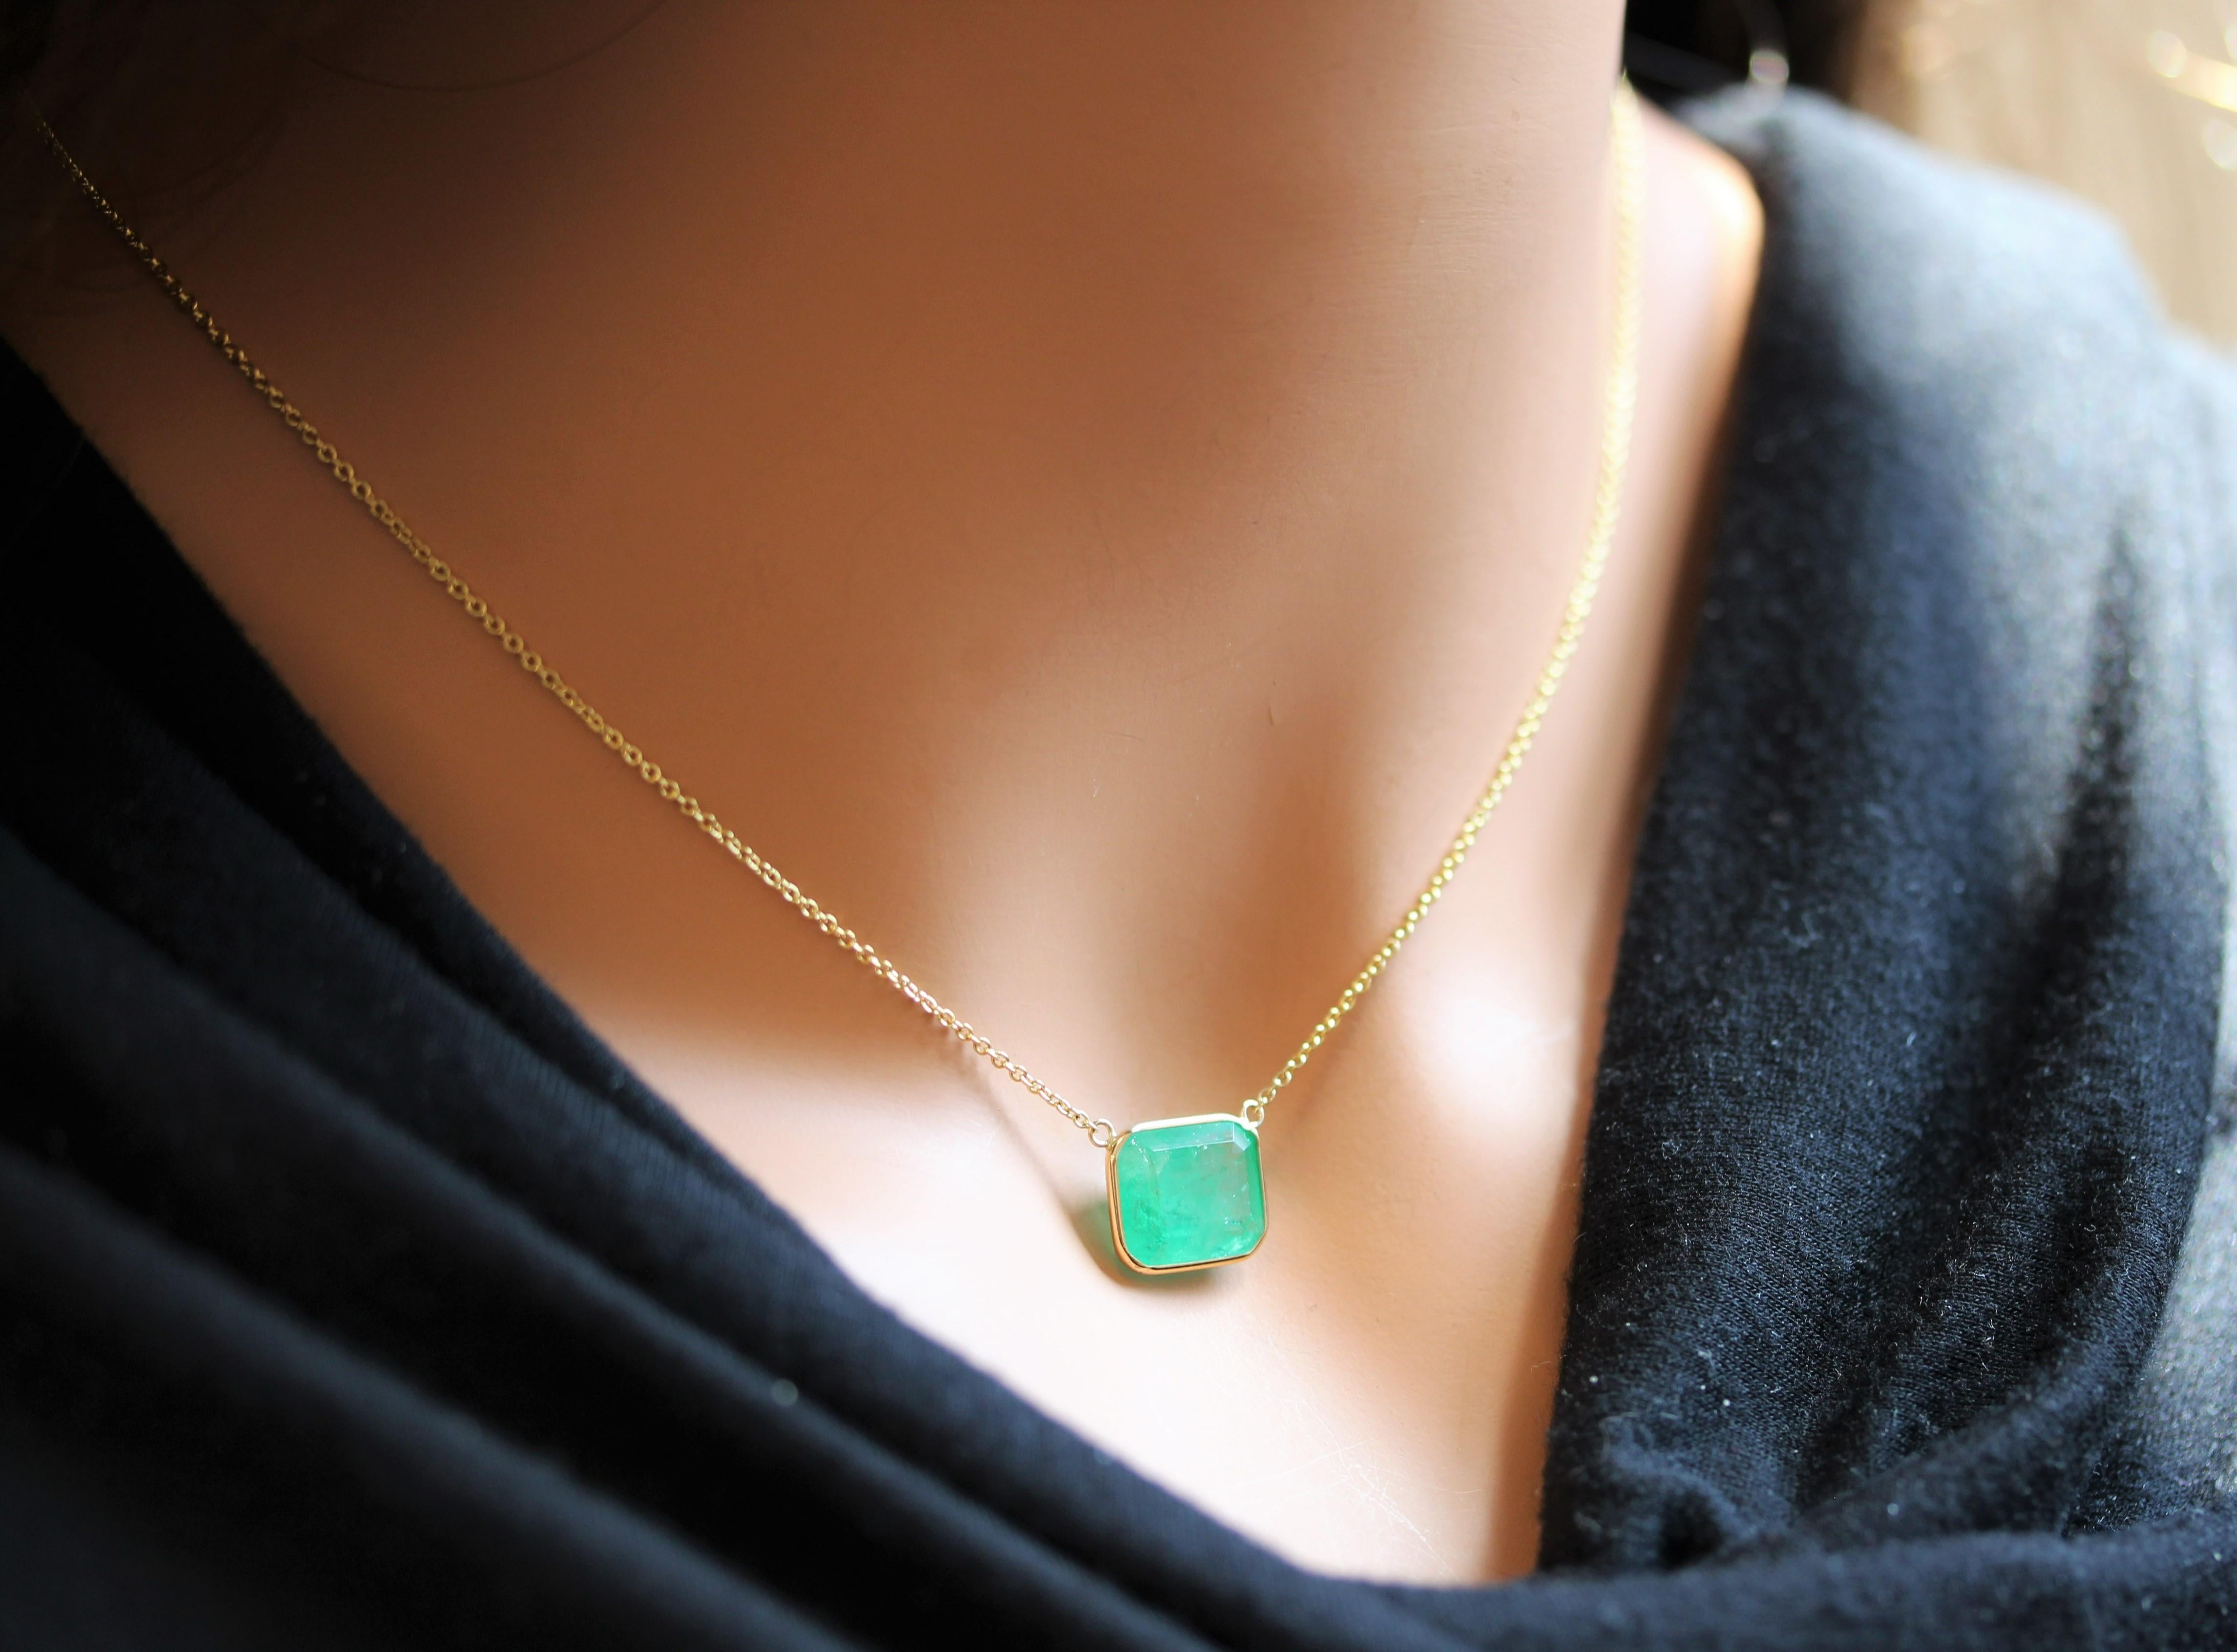 Make a statement worn solo and level up your collar candy when layered. How would you wear it? This is a natural Emerald, Gemstone Emerald, color Green, handmade necklace wire-wrapped in 14k yellow gold. This is a piece you'll wear forever. We made